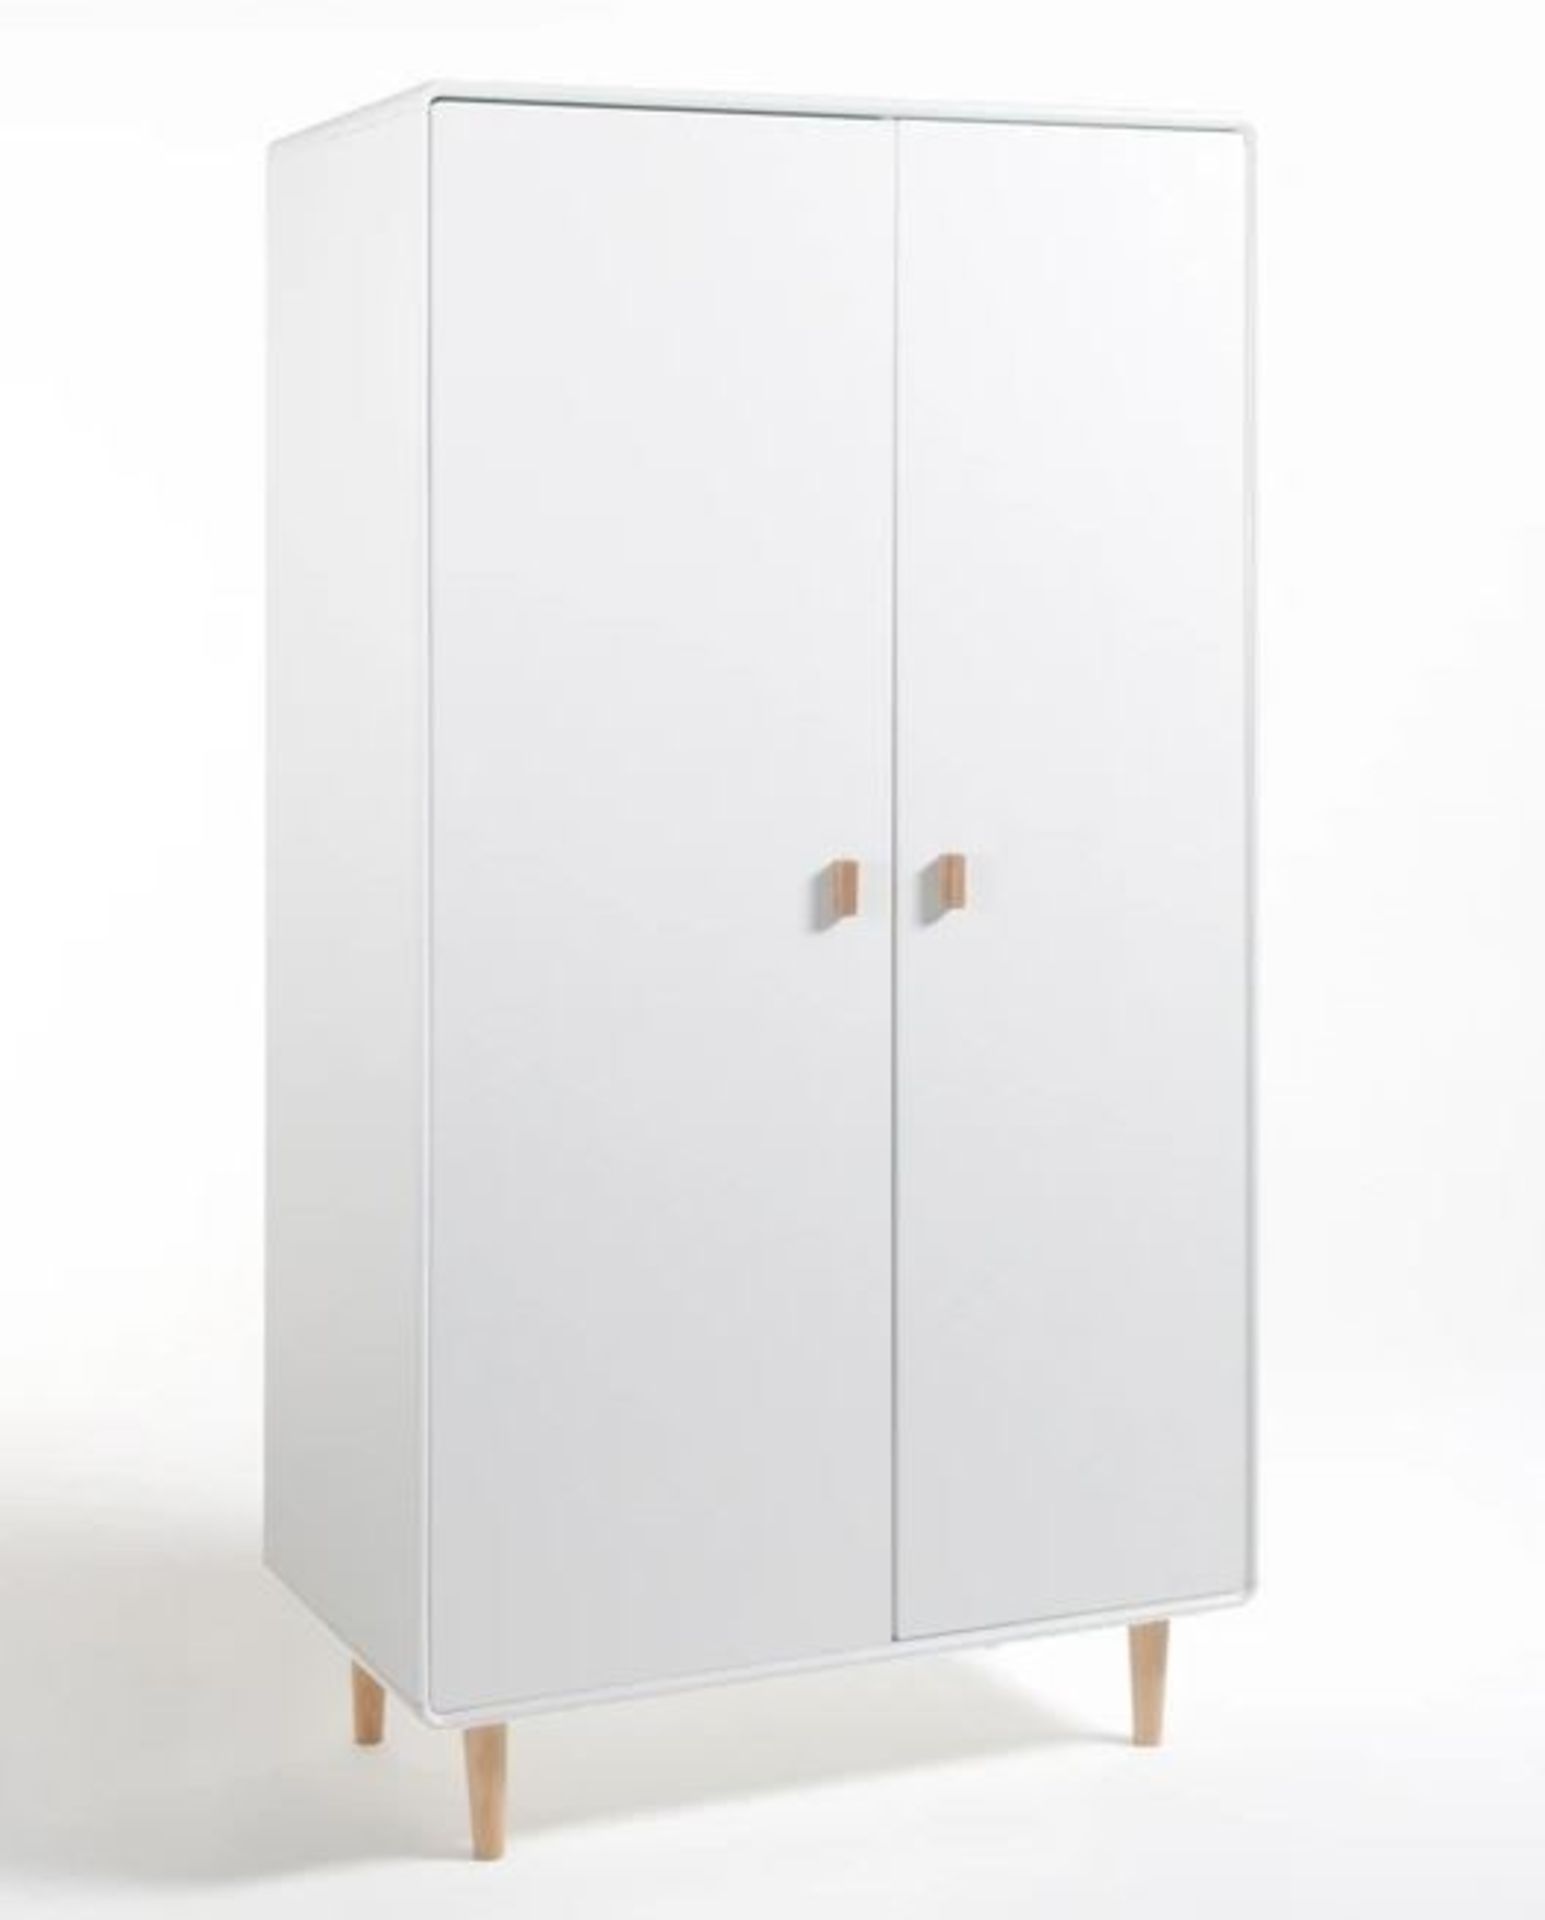 1 GRADE B BOXED JIMI 2 DOOR WARDROBE IN WHITE / RRP £525.00 (PUBLIC VIEWING AVAILABLE)